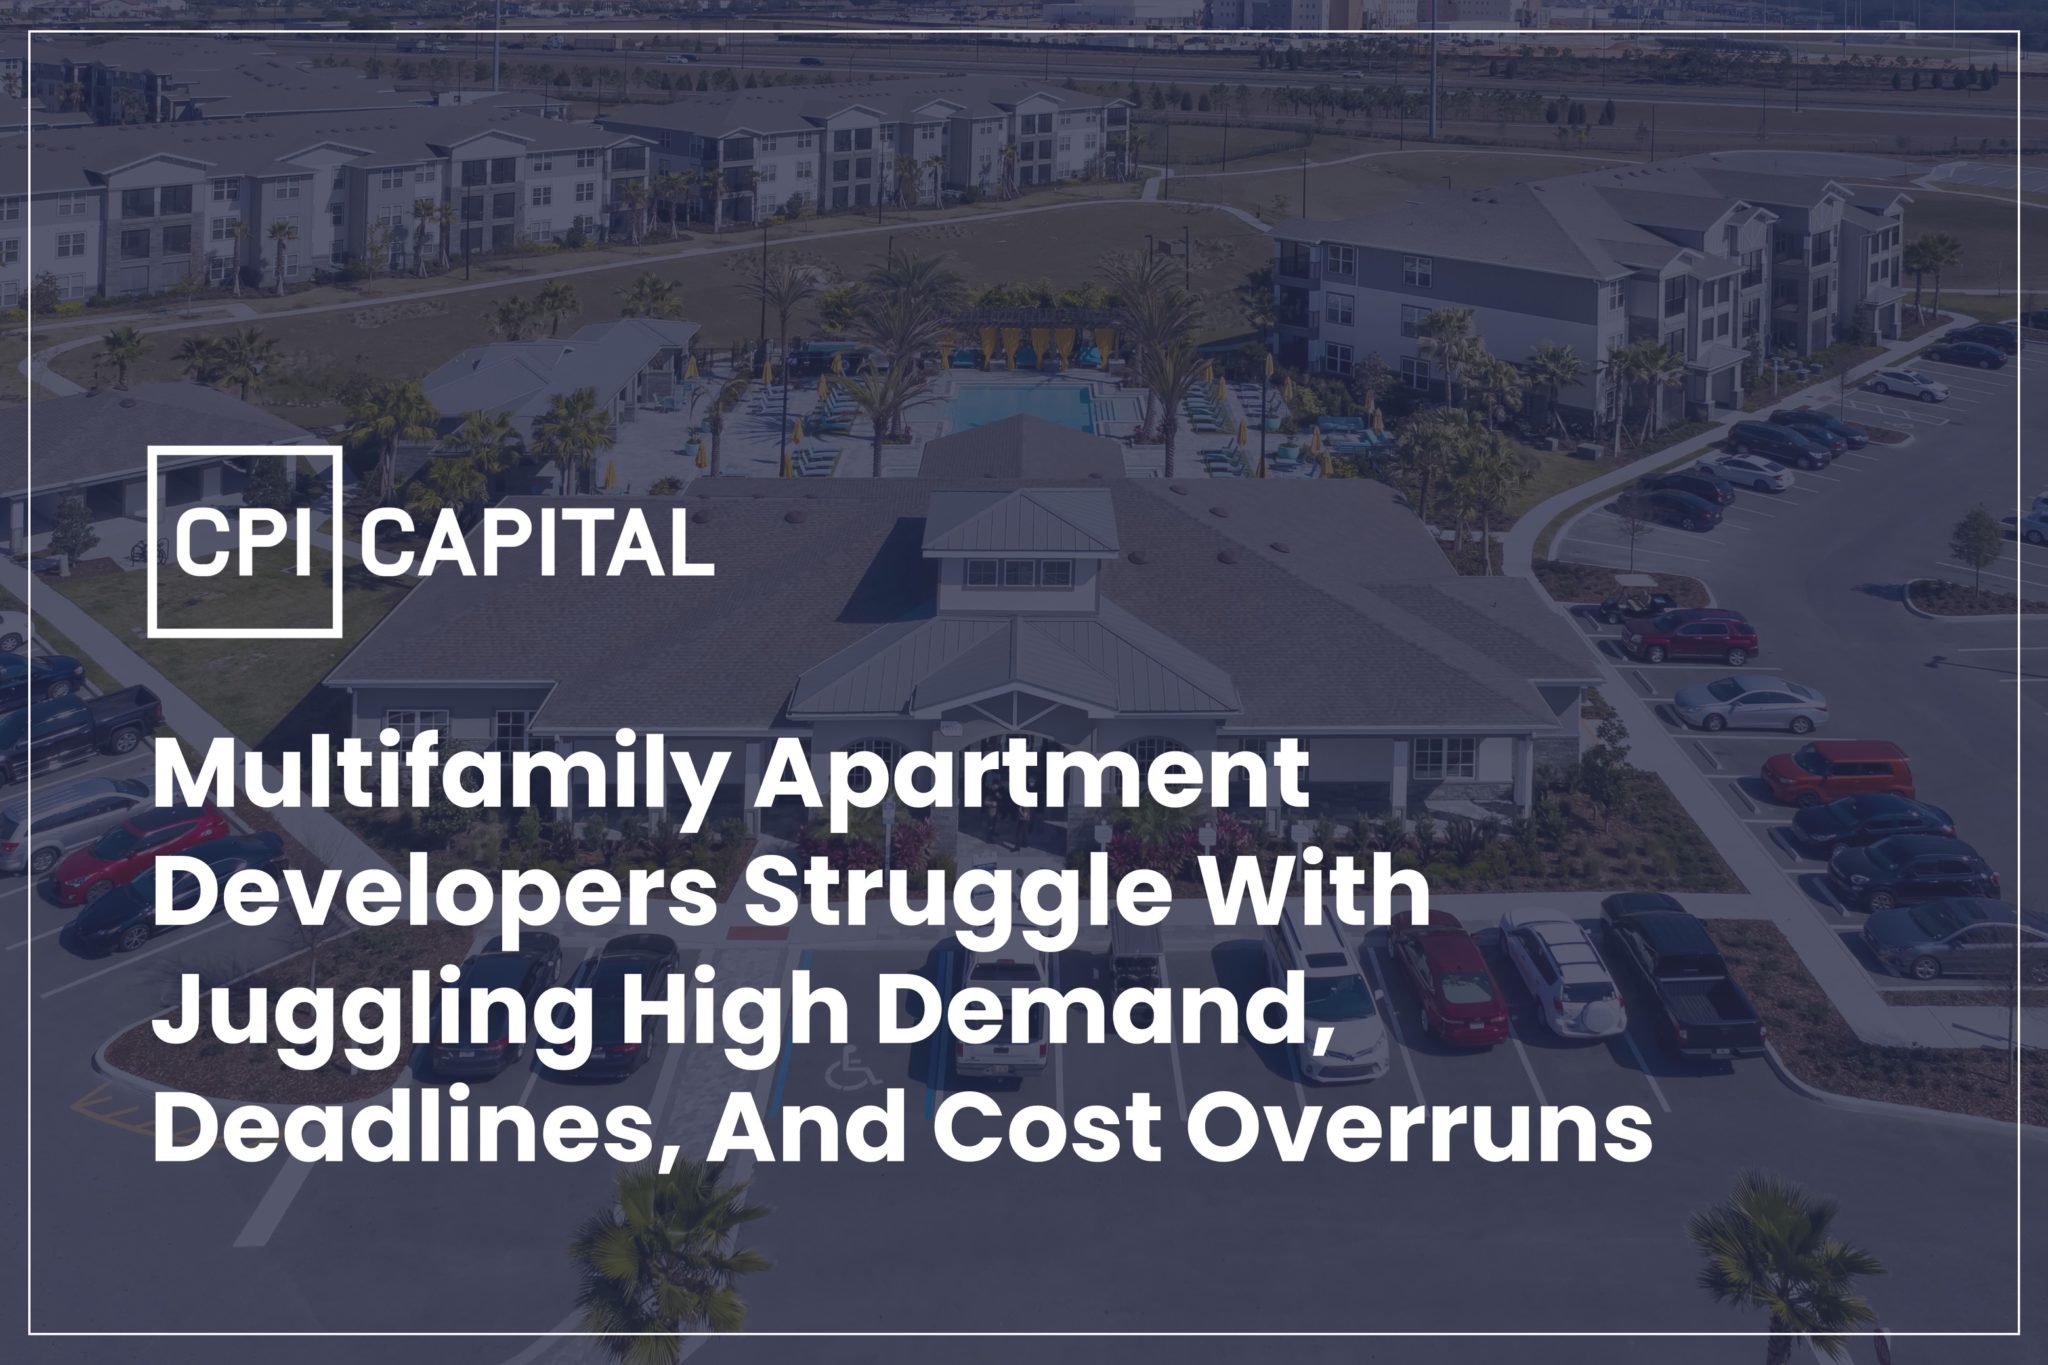 Multi-family apartment developers struggle with juggling high demand, deadlines and cost overruns